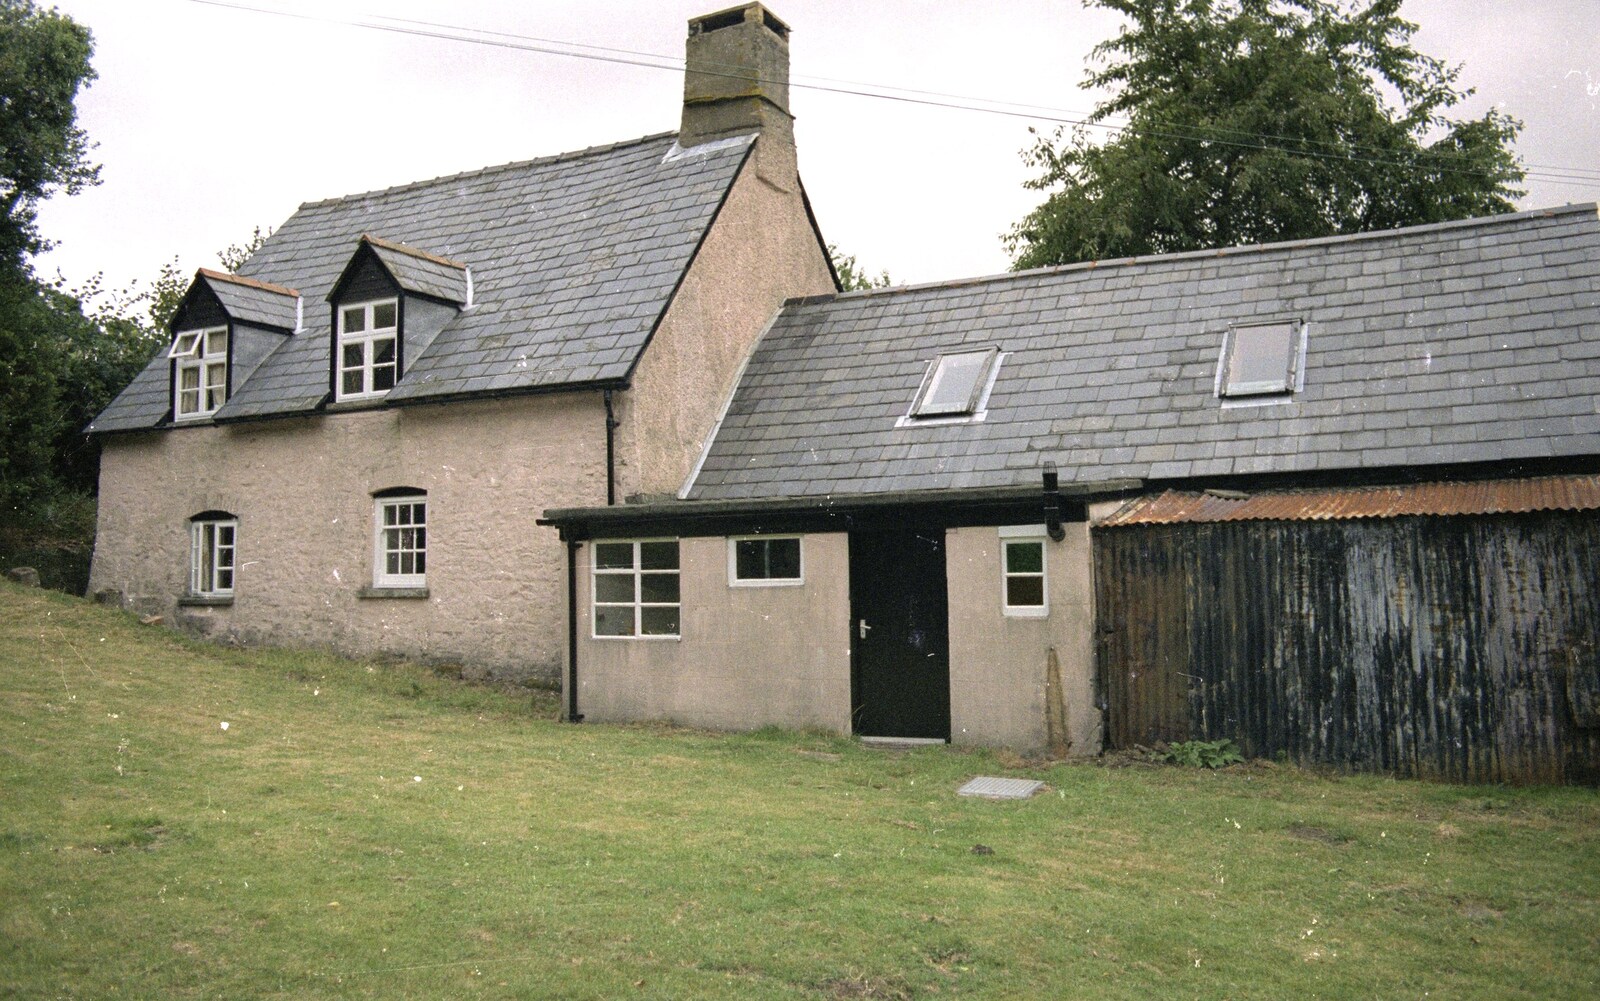 The farmhouse, first thing from A Walk in the Brecon Beacons, Bannau Brycheiniog, Wales - 5th August 1990